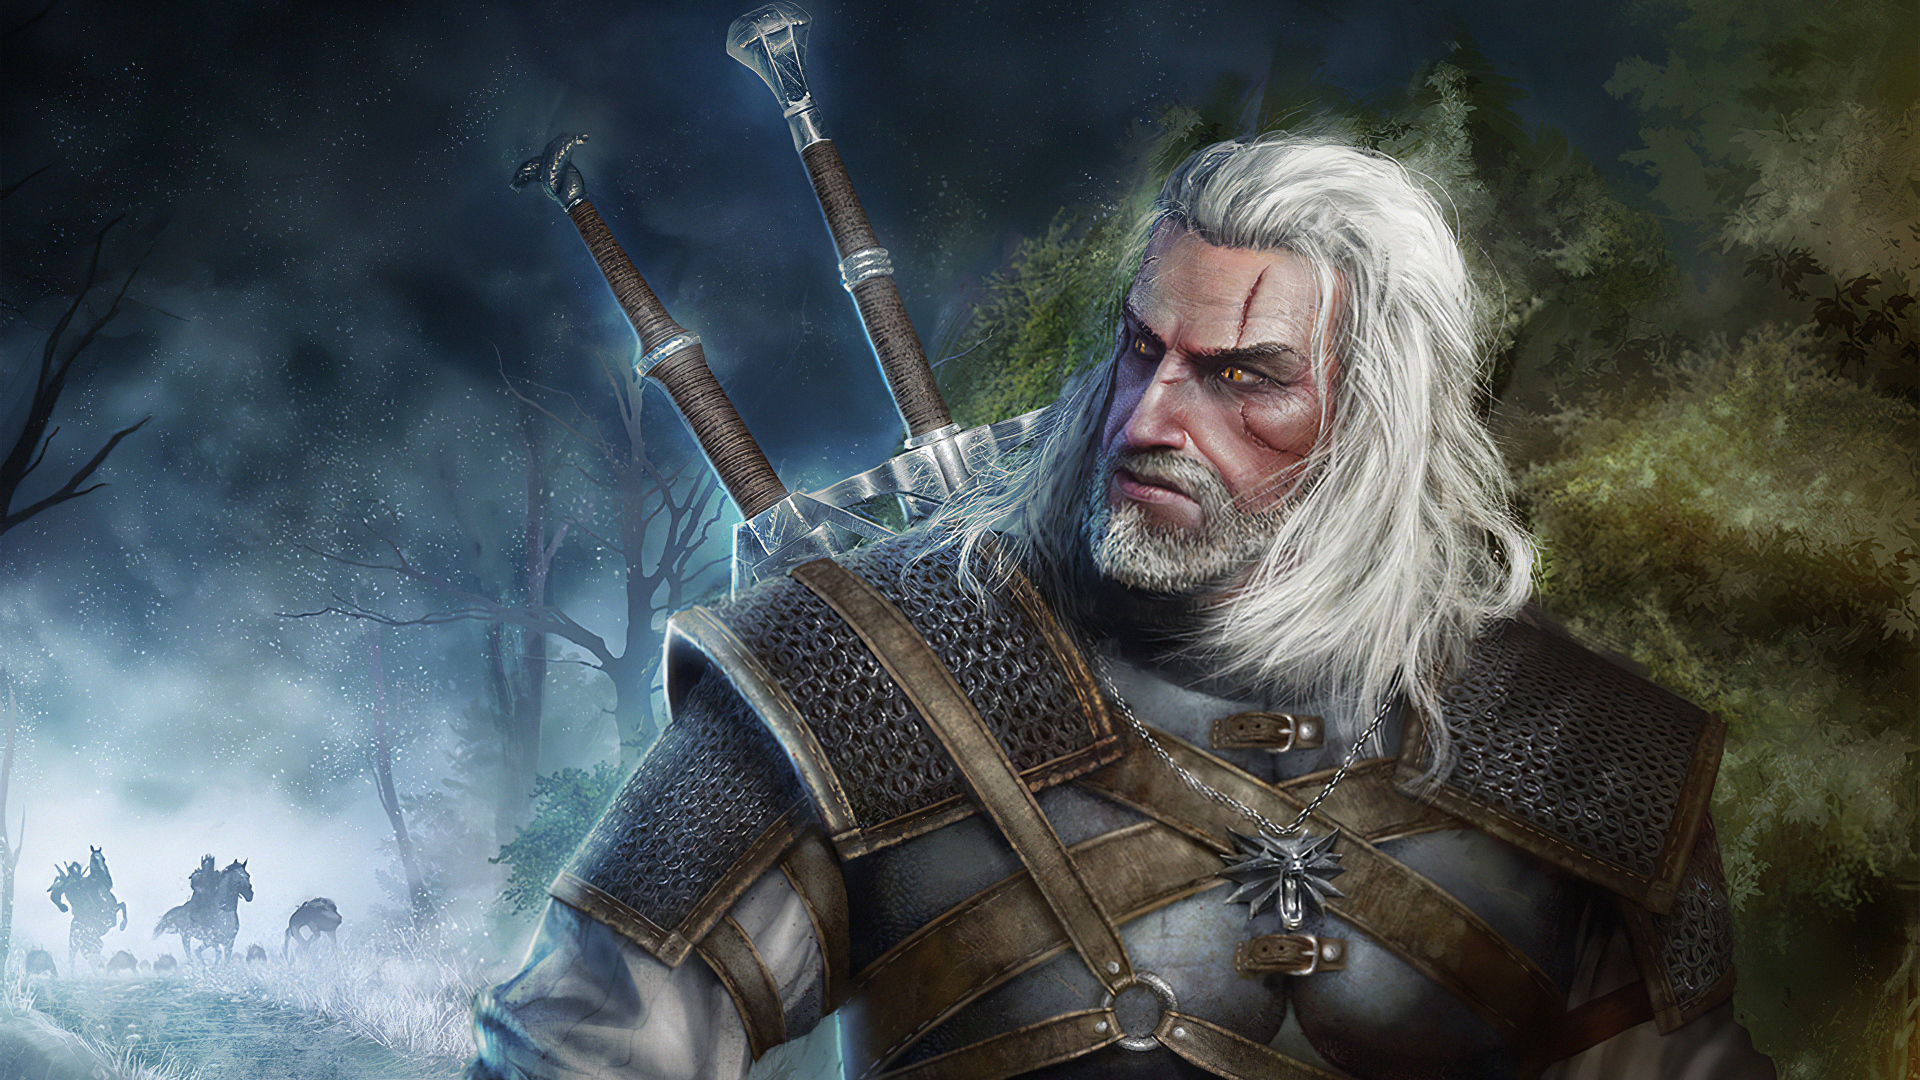 Shot from the computer game The Witcher 3: Wild Hunt